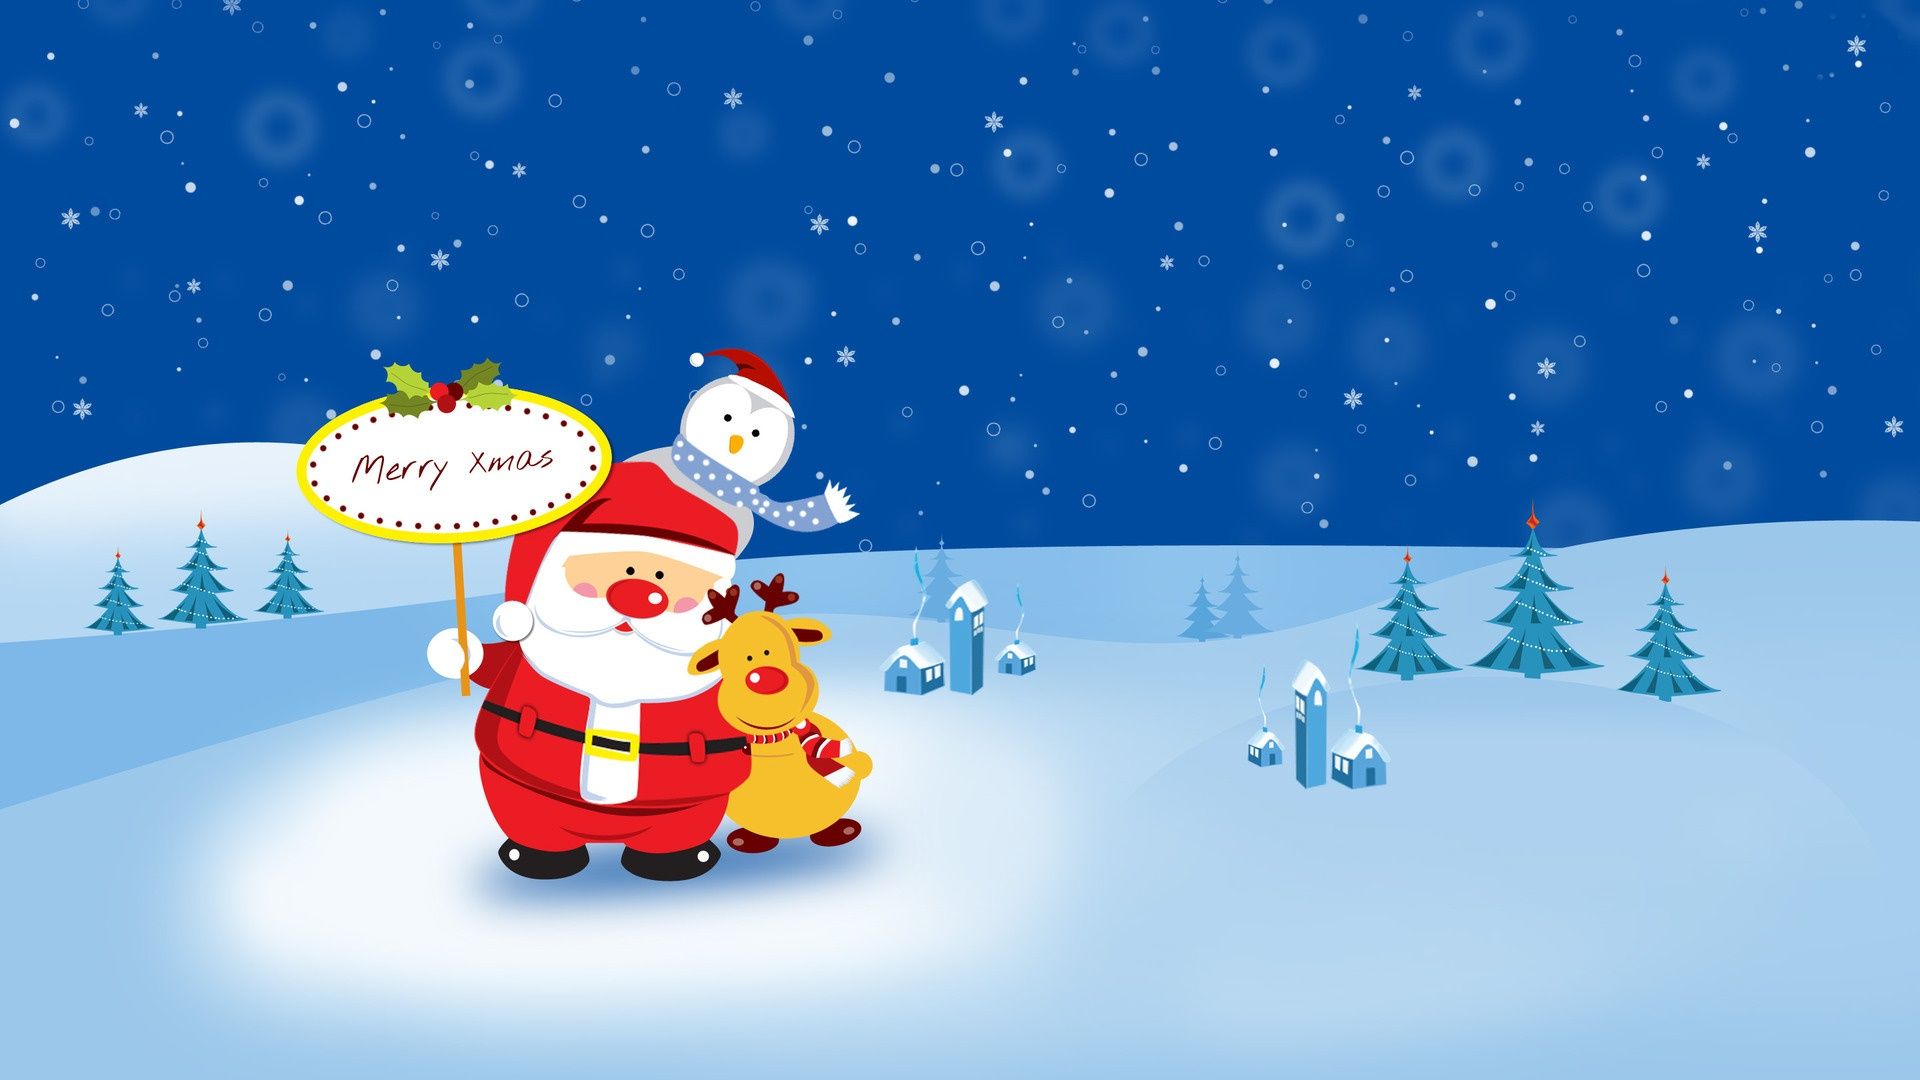 Cute Holiday s For iPhone wallpaper | 1920x1080 | #32976